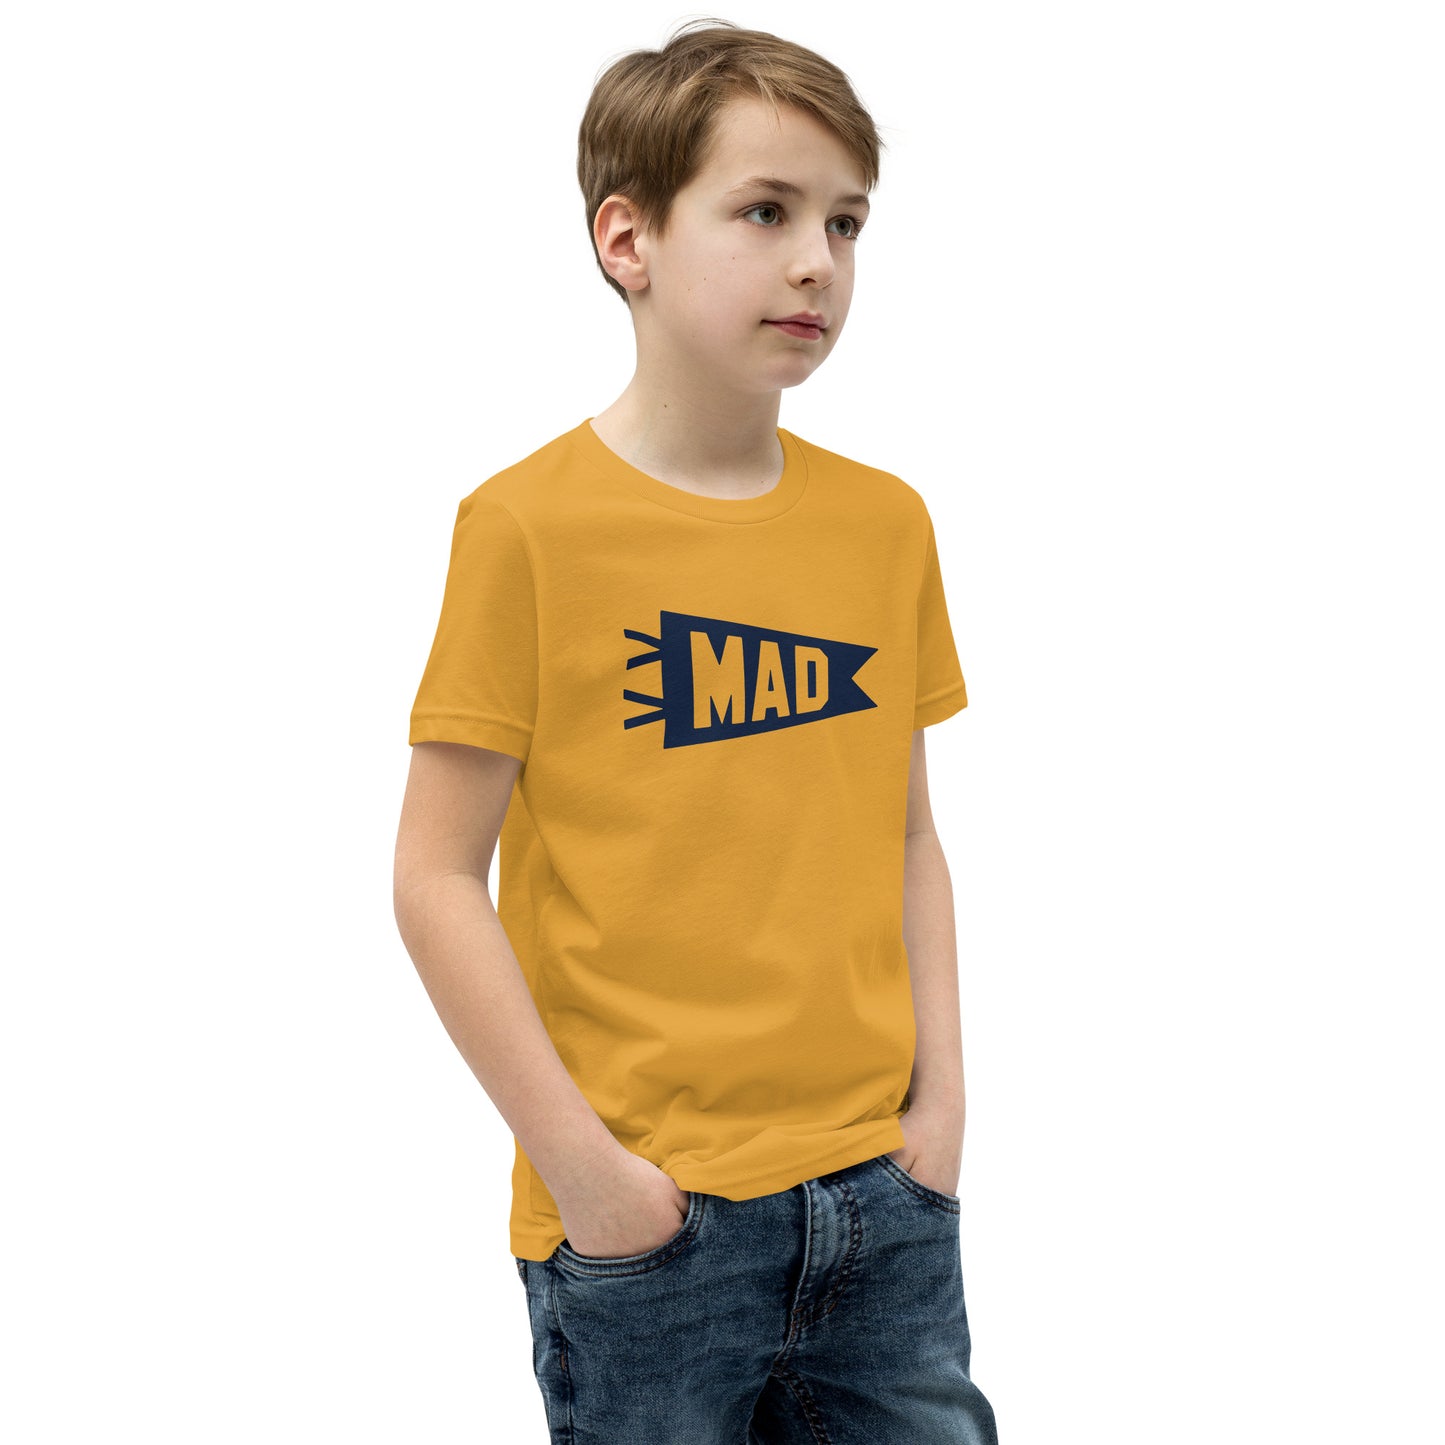 Kid's Airport Code Tee - Navy Blue Graphic • MAD Madrid • YHM Designs - Image 07